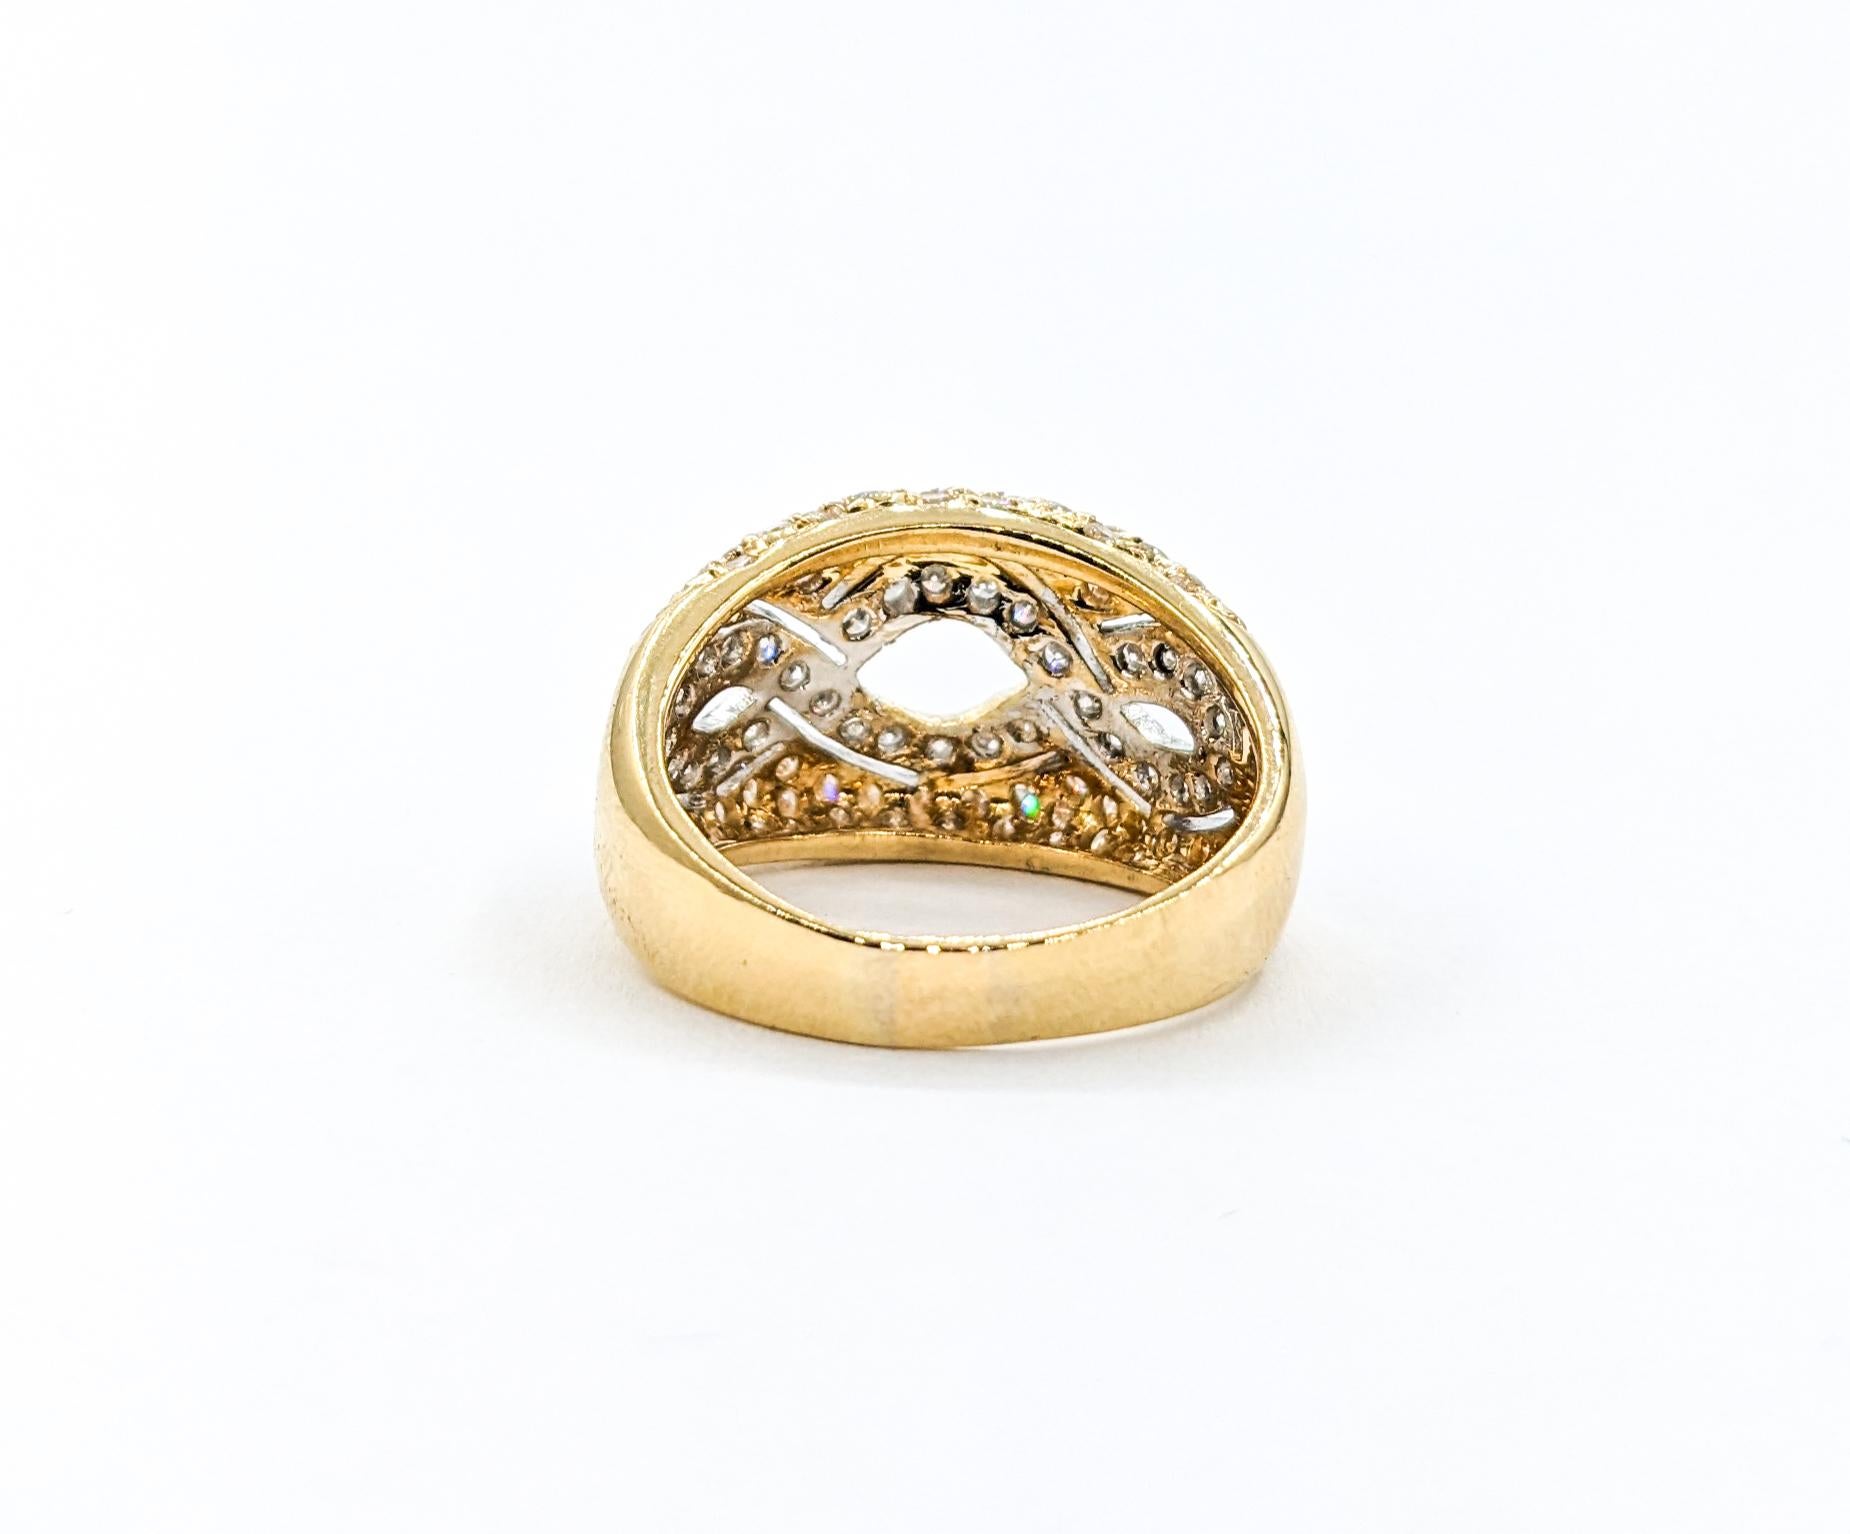 1ctw Diamond Ring In Two-Tone Gold For Sale 3